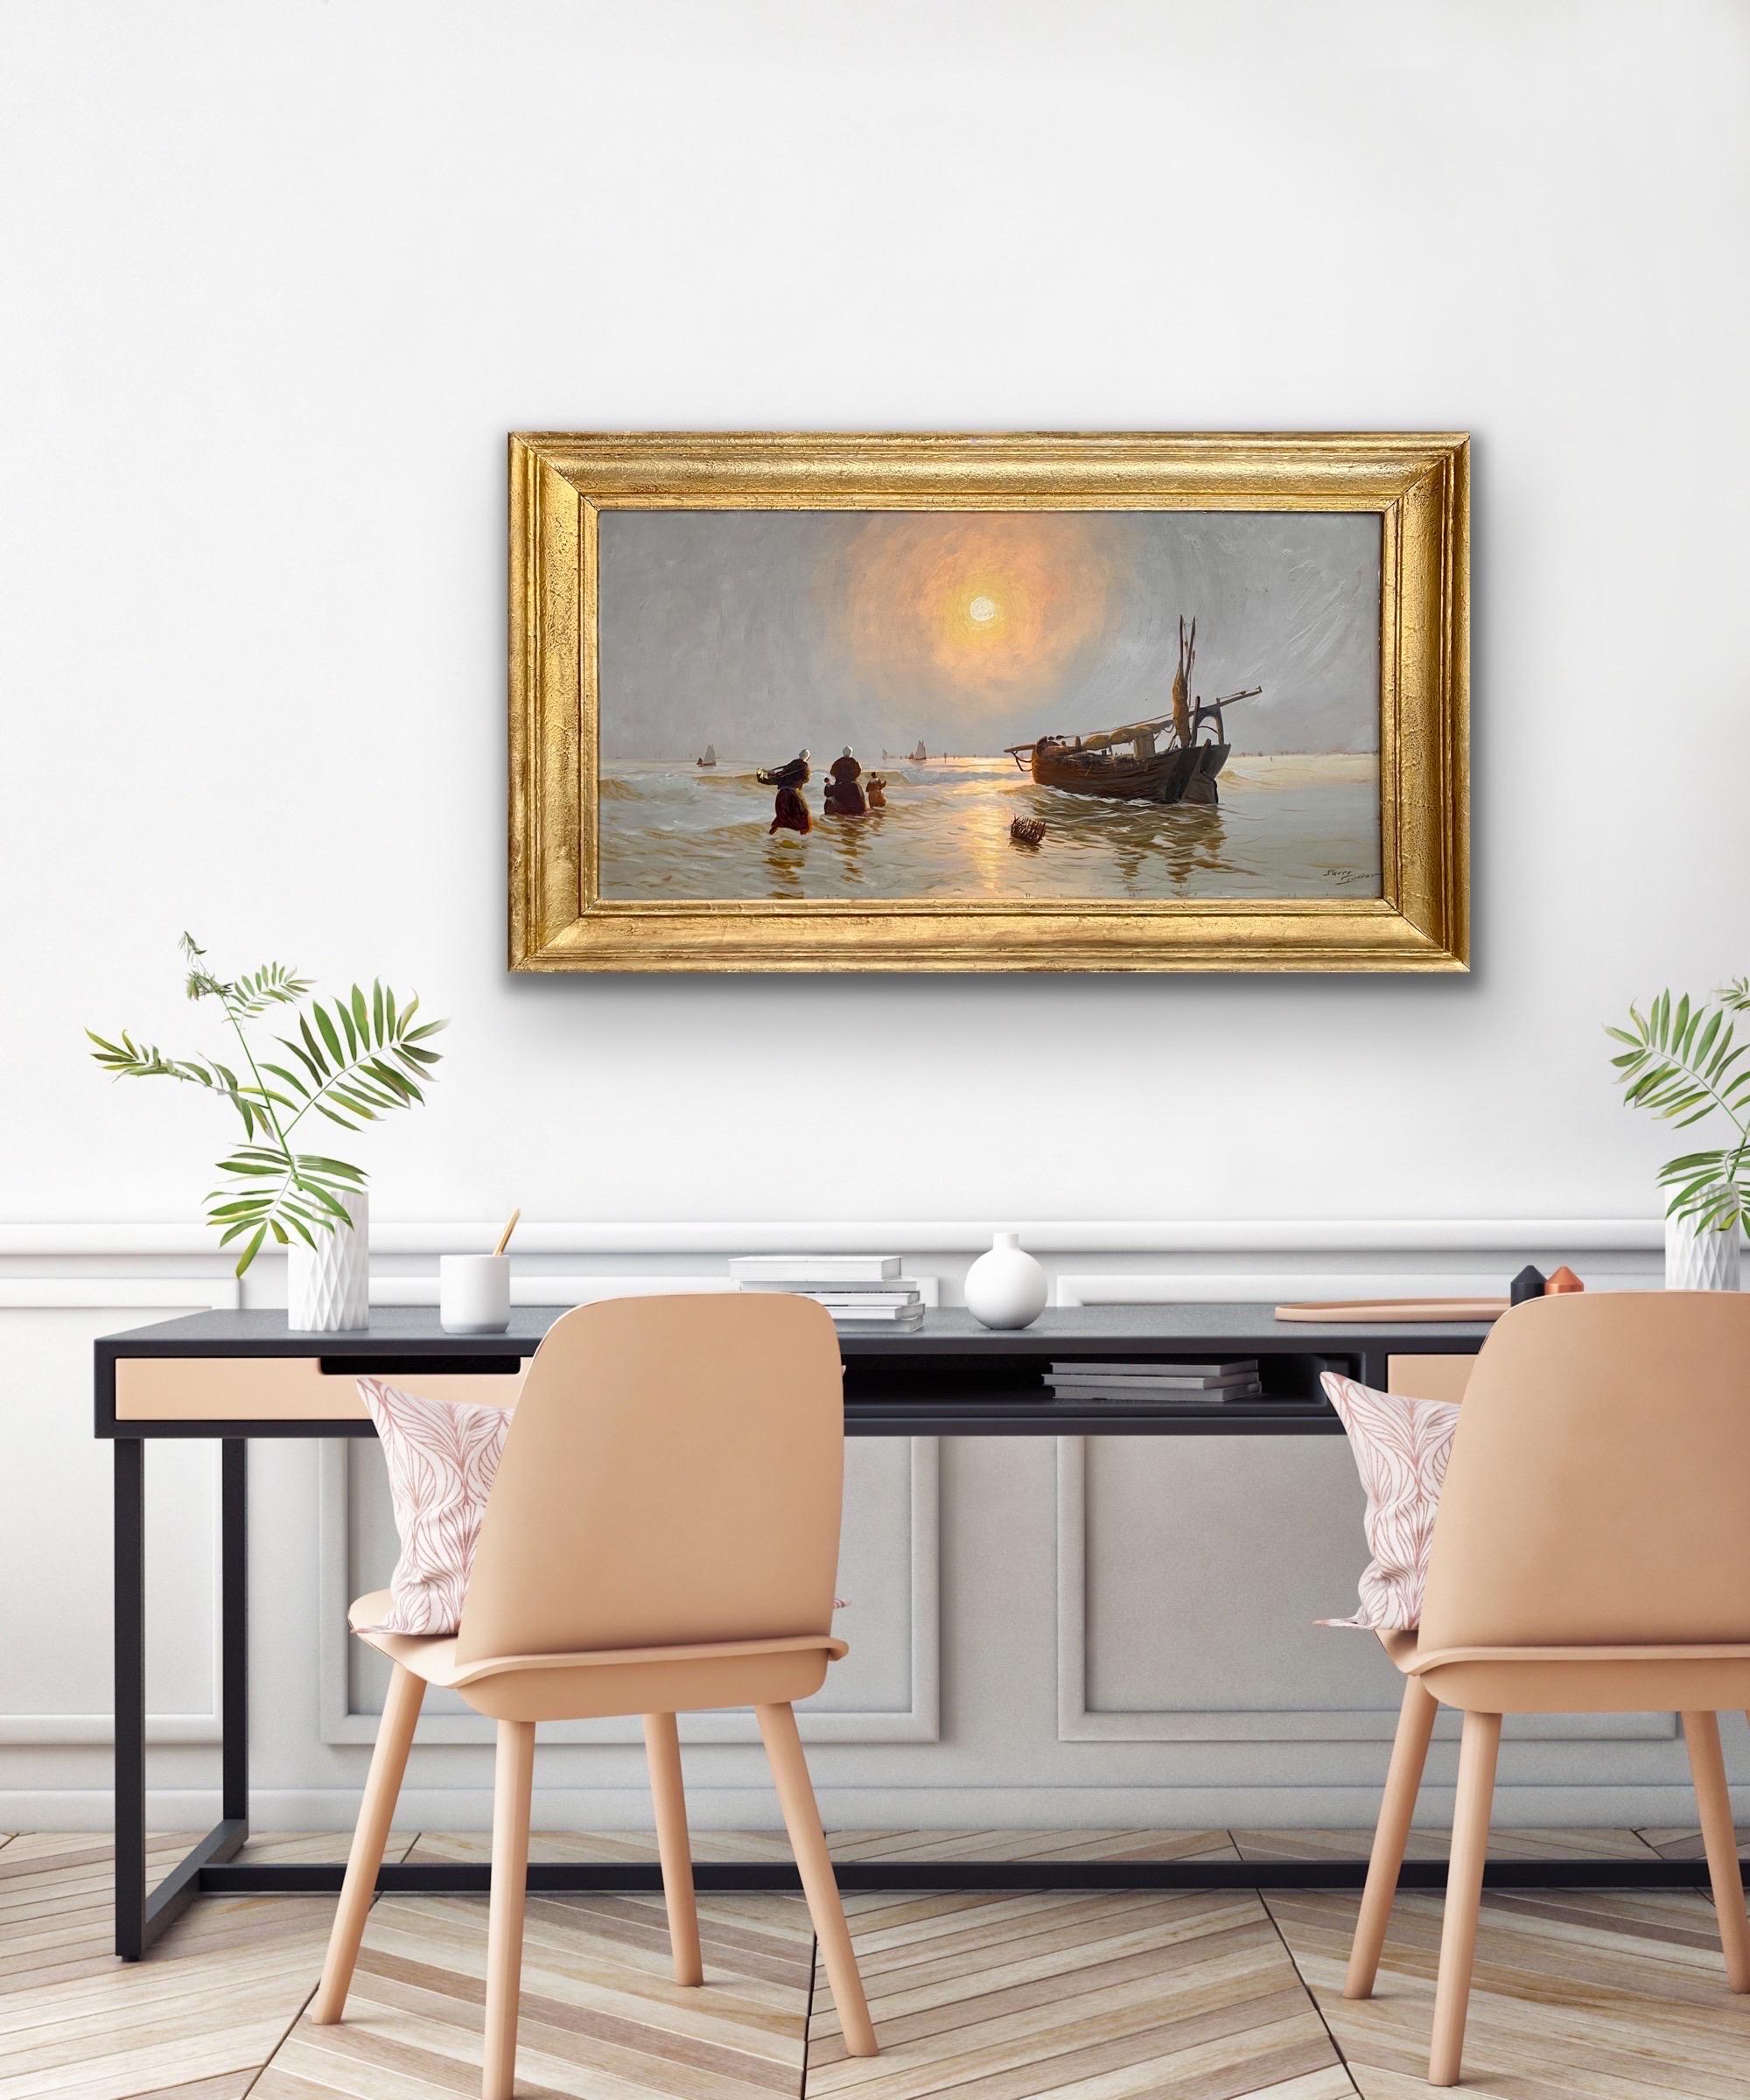 Large French painting Sunset over the beach by Pierre Godar, ca. 1950s

Wonderful and vibrant French impressionist painting depicting a sunset over a French beach. Fishermen can be seen returning home in the distance while fisherwomen and their